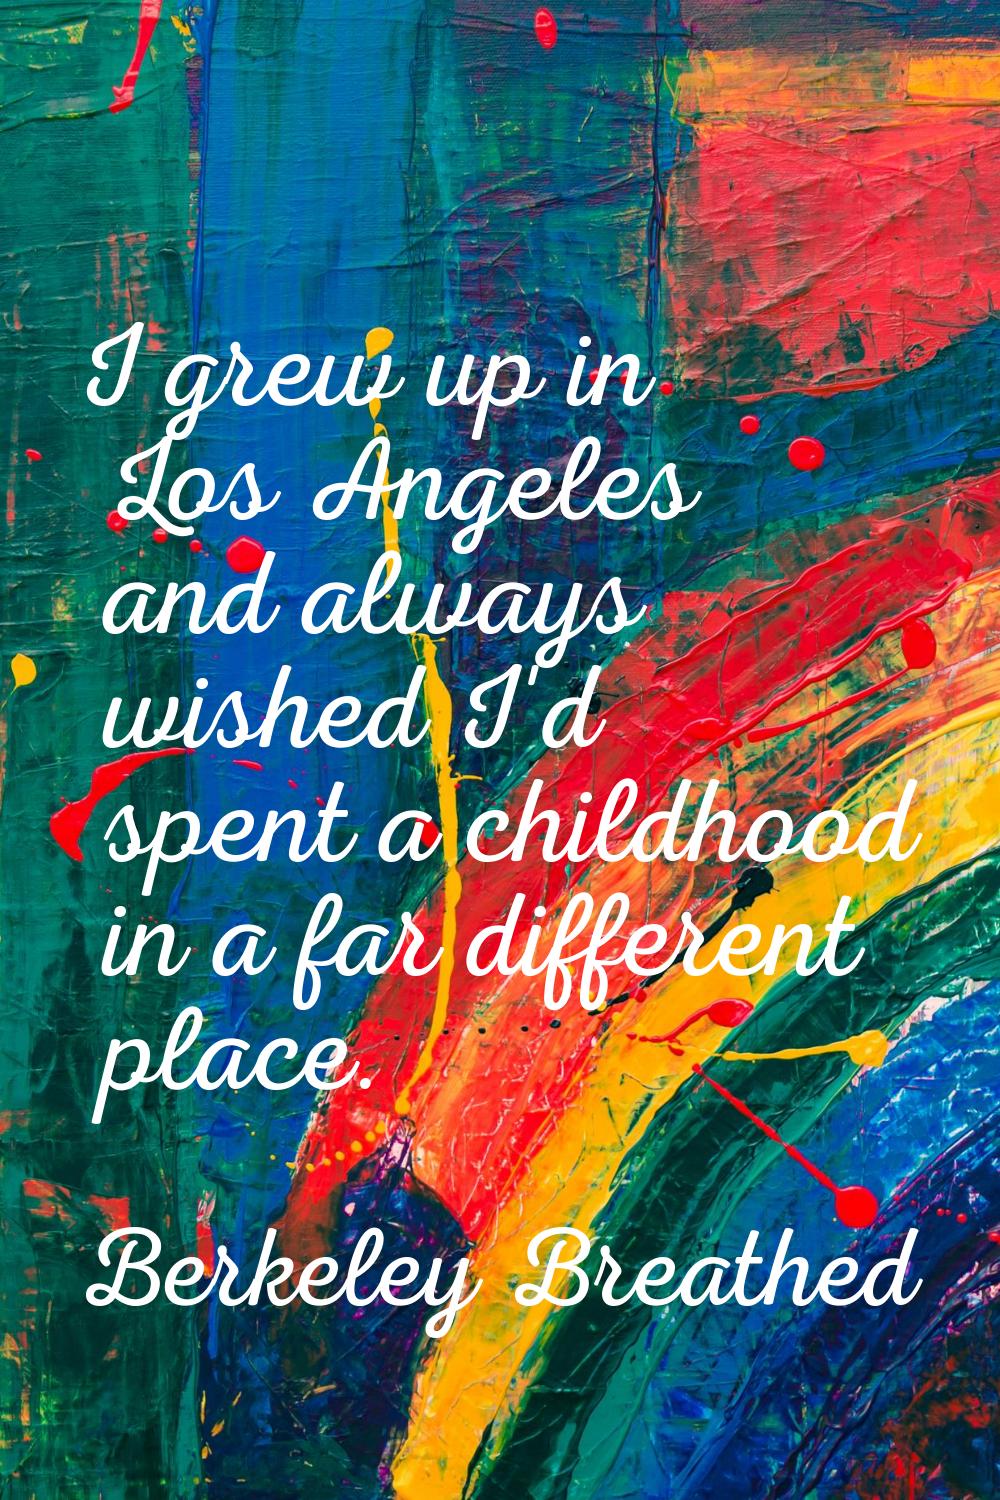 I grew up in Los Angeles and always wished I'd spent a childhood in a far different place.